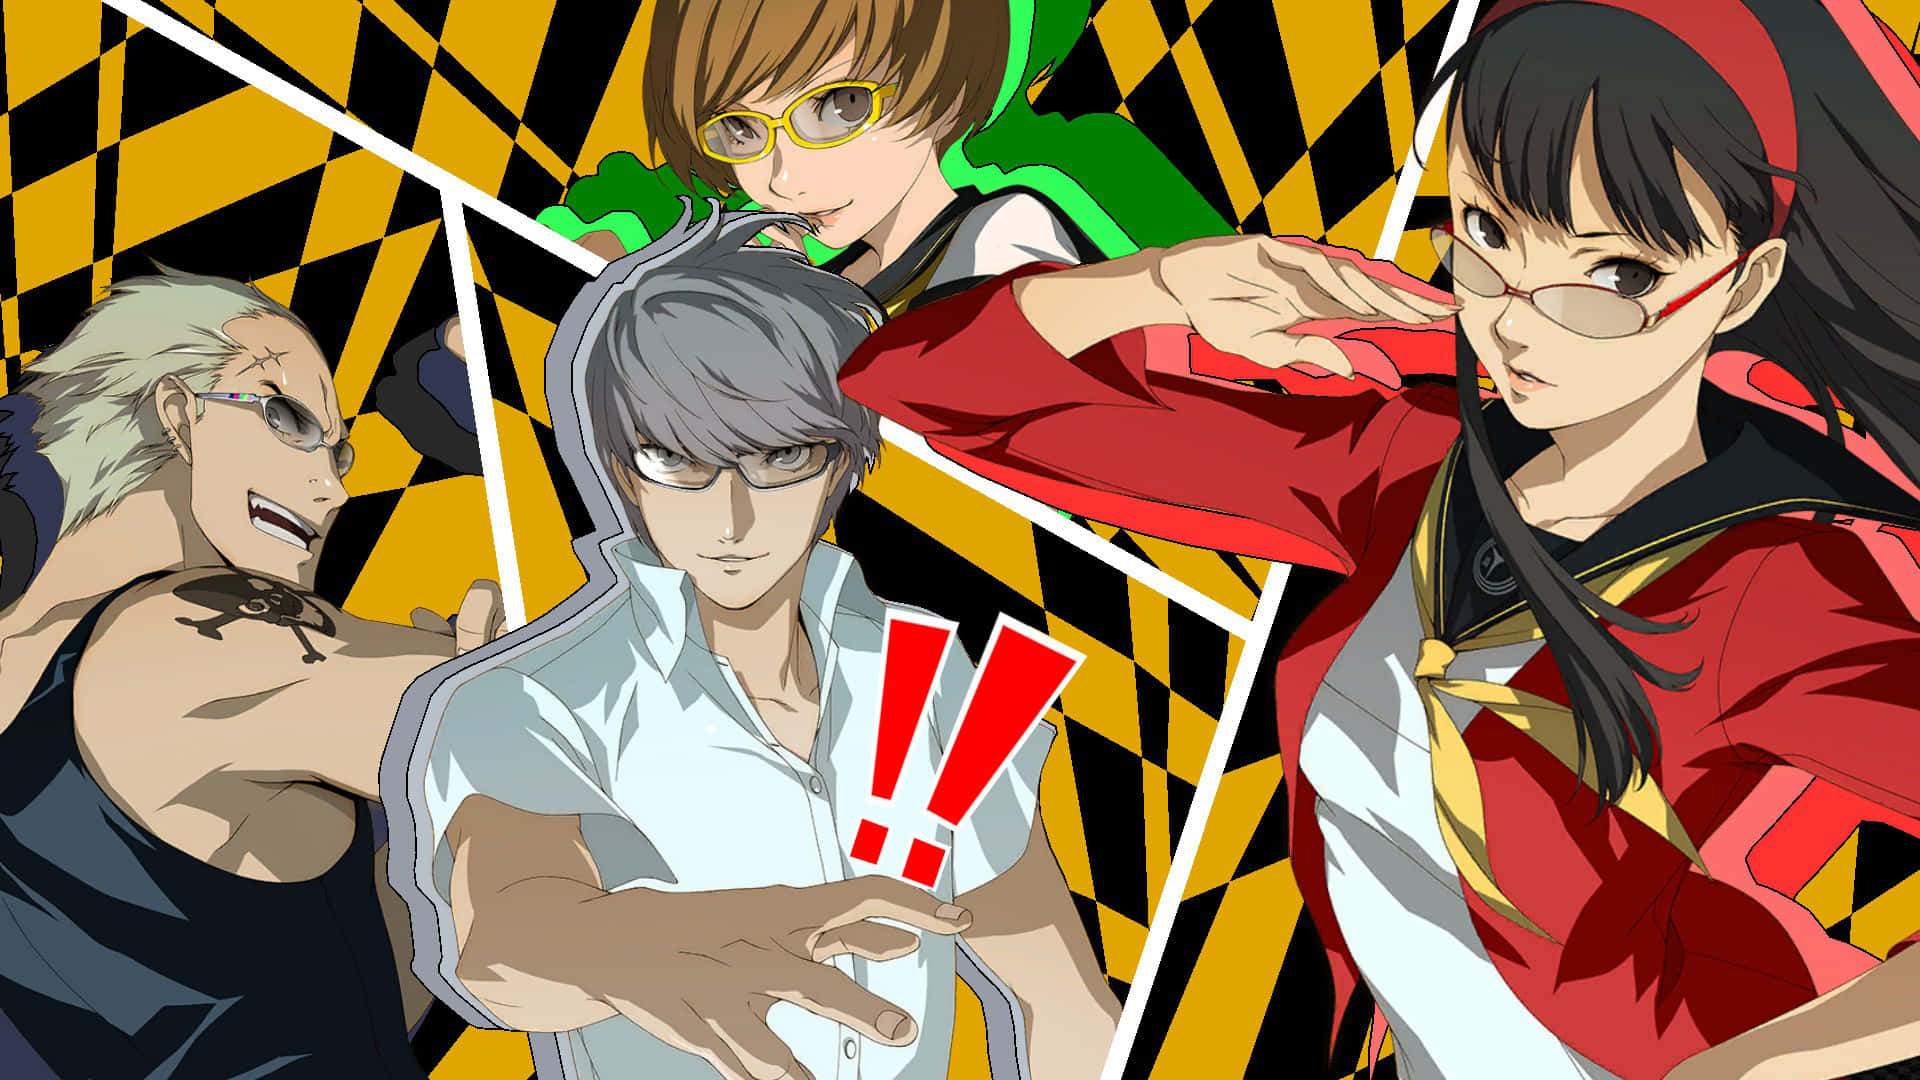 Persona 4: Action-Packed Adventure Awaits!